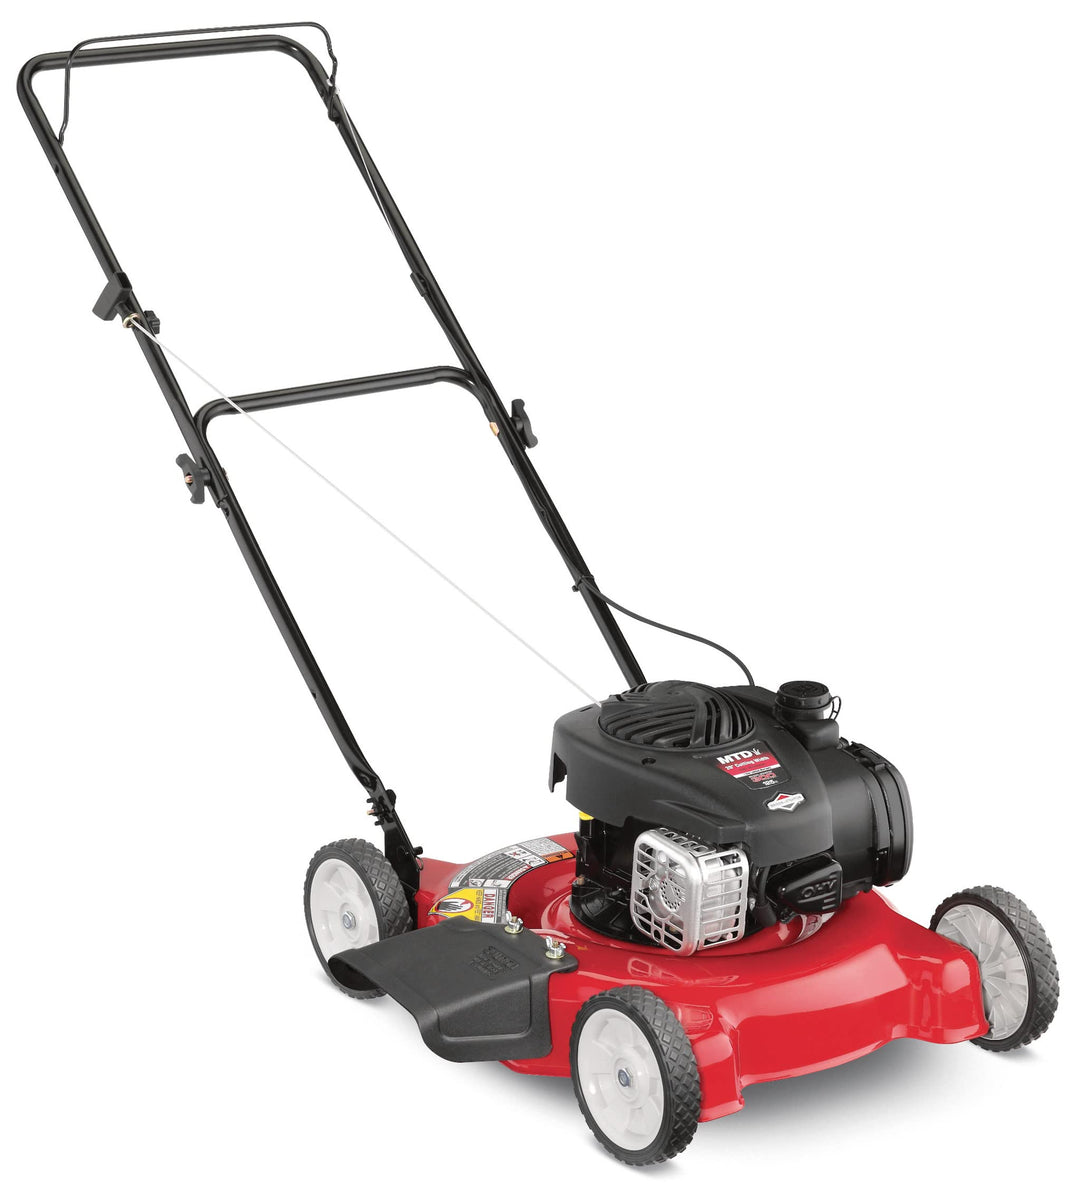 Yard Machines 11A-02BT729 20-in Push Lawn Mower with 125cc Briggs & Stratton Gas Powered Engine, Black and Red [Remanufactured]